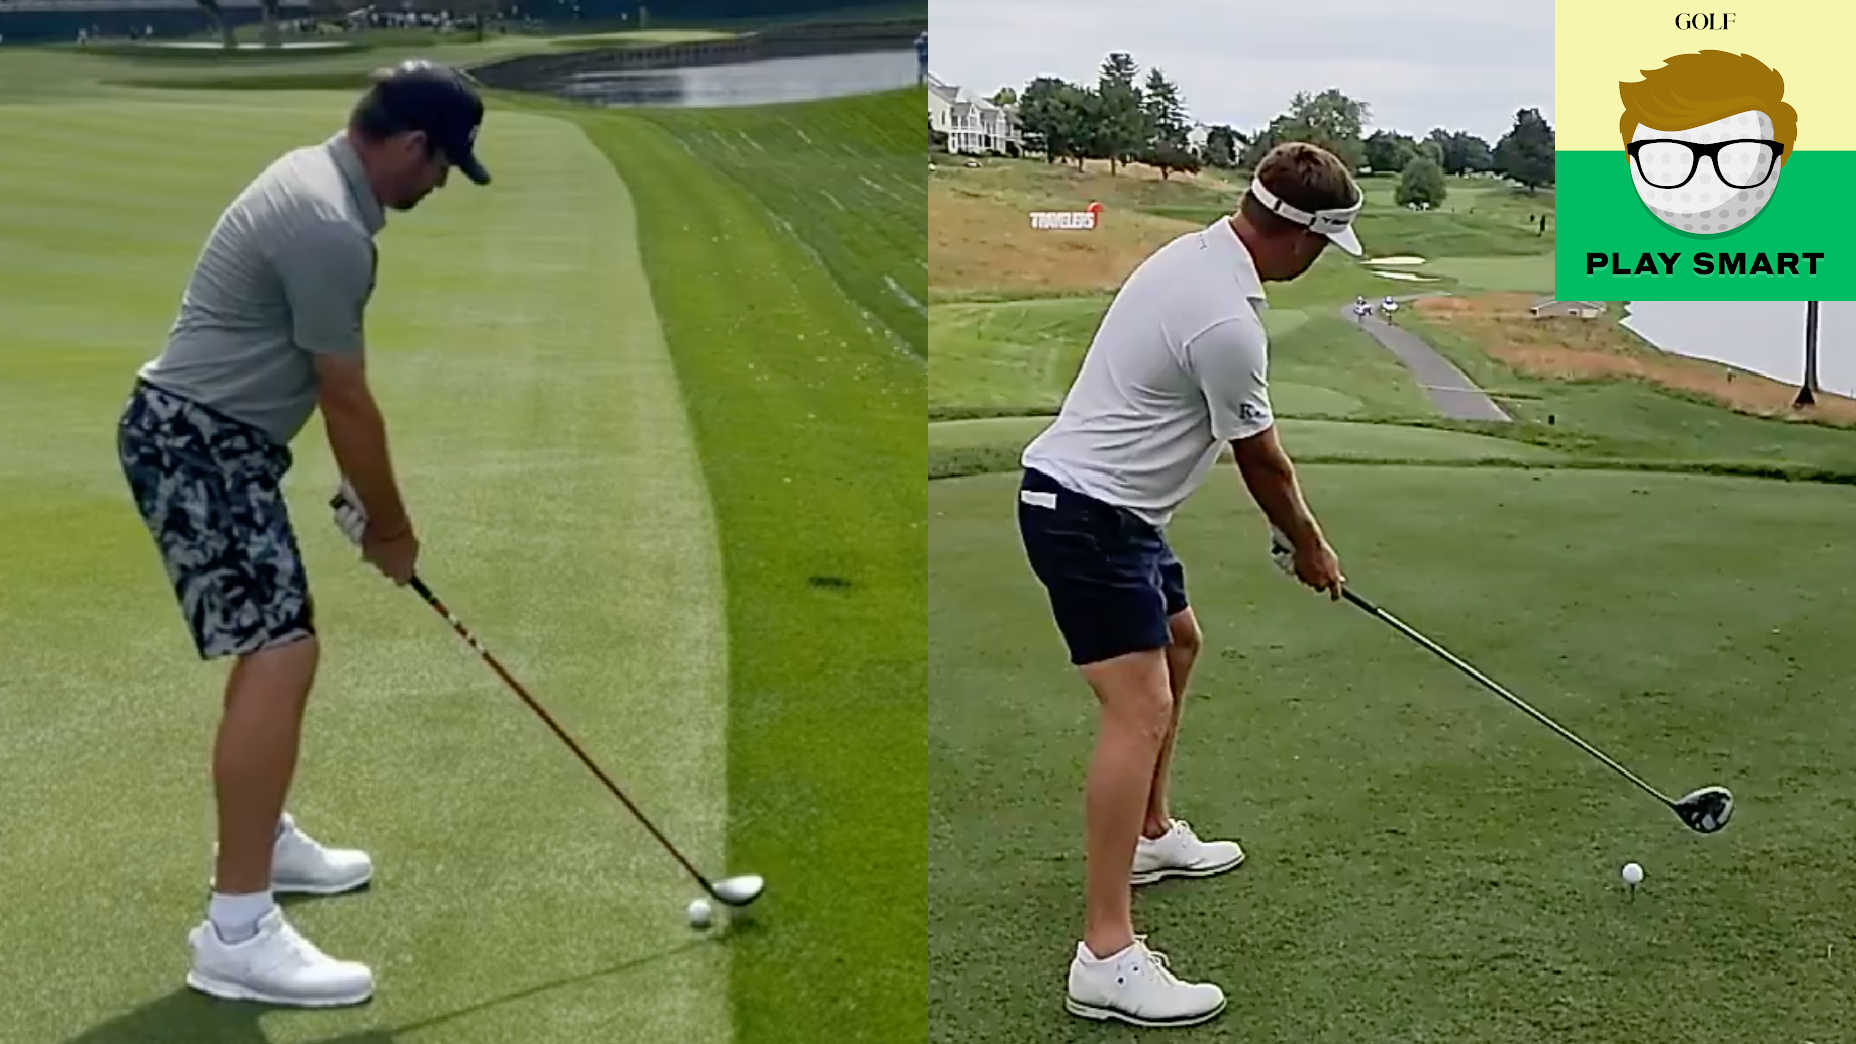 Are you standing too far from the ball? Here's how 2 Tour pros check